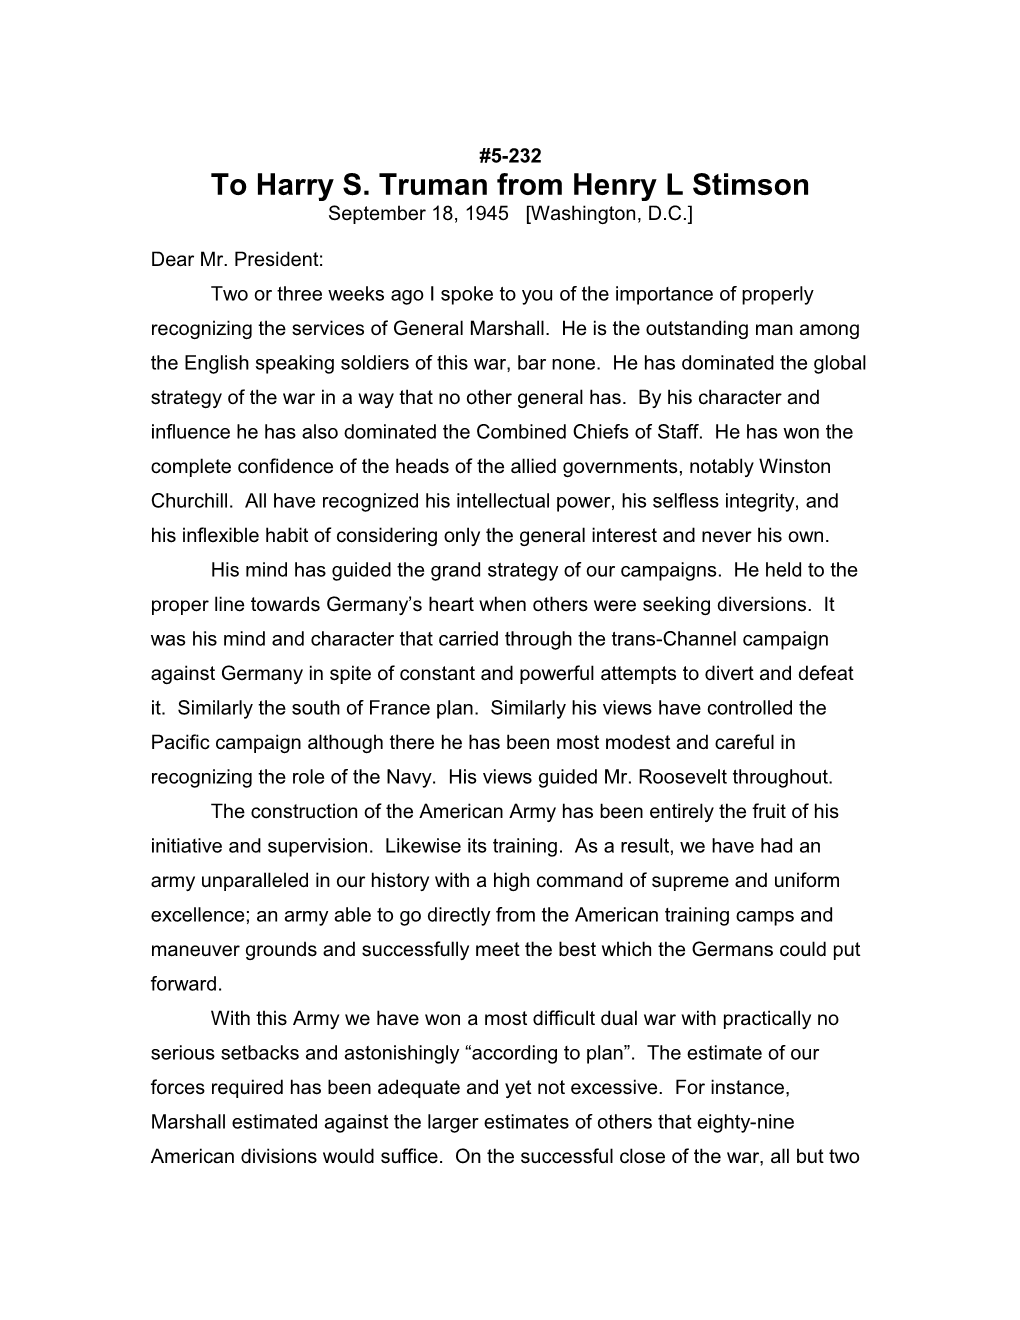 To Harry S. Truman from Henry L Stimson